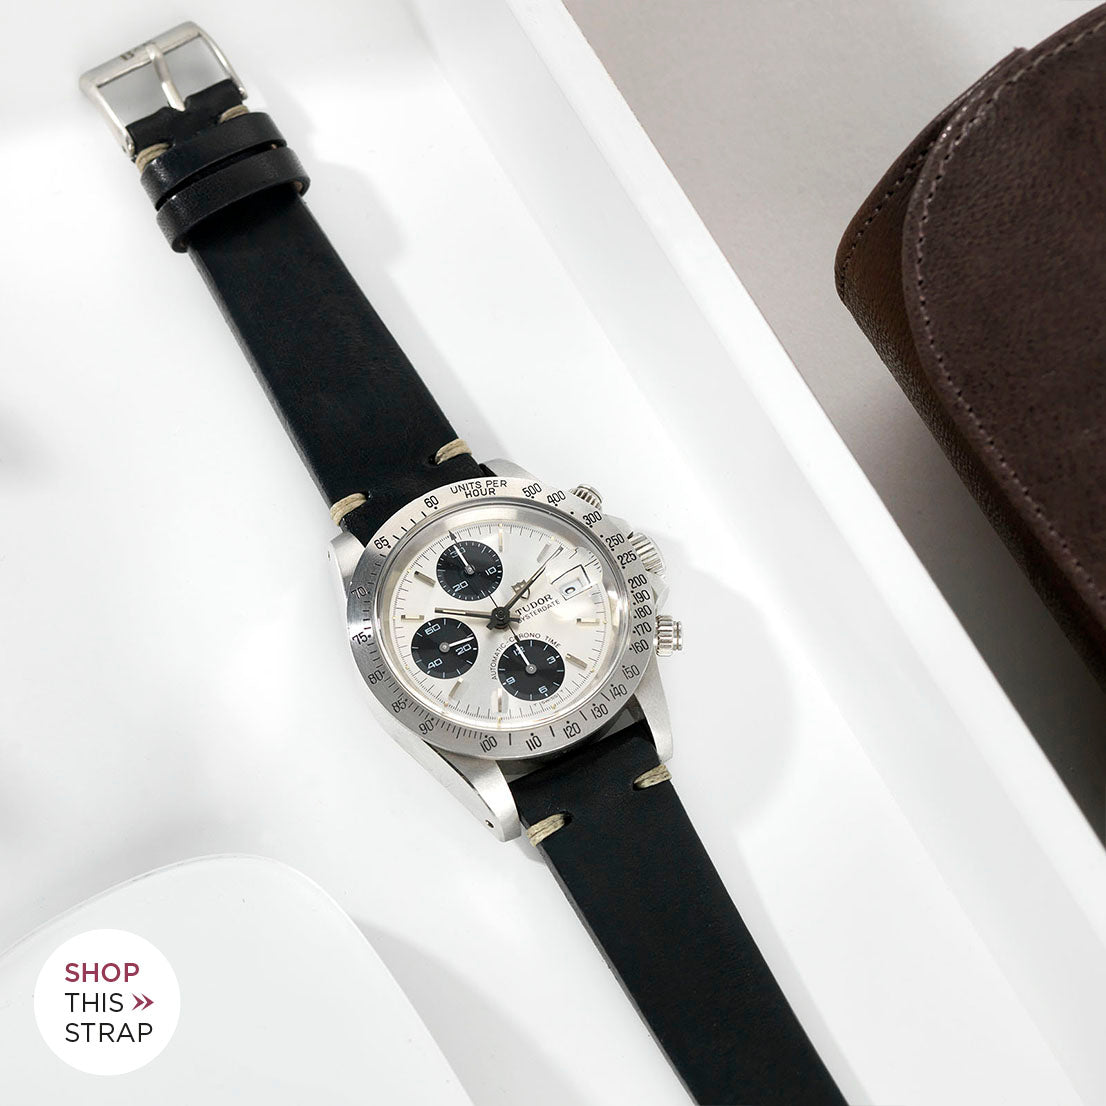 Bulang and Sons_Strap Guide_The Tudor Big Block Silver Dial_Black Leather Watch Strap